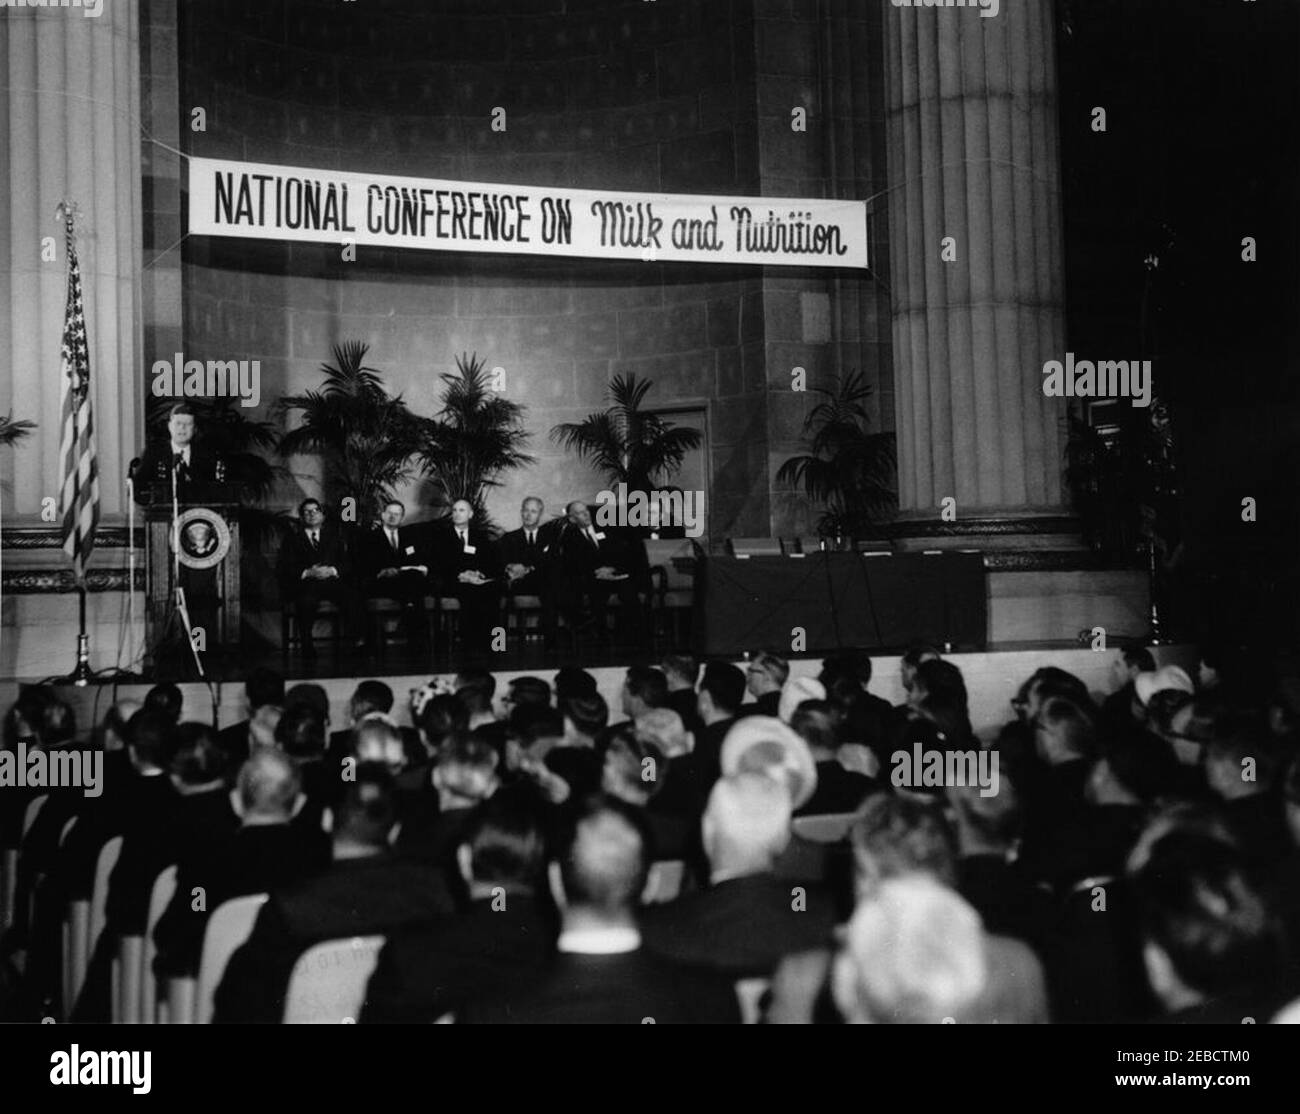 Address before the National Conference on Milk and Nutrition, 10:32AM. President John F. Kennedy speaks to an audience during the National Conference on Milk and Nutrition. Among those seated on stage are: Secretary of Agriculture Orville Freeman; Director of the Youth Physical Fitness Program Charles B. u201cBudu201d Wilkinson; Robert G. Lewis, Deputy Administrator for Price and Stabilization of the Agricultural Stabilization and Conservation Service; and Herb Jones of the Department of Agriculture. Departmental Auditorium, Washington, D.C. Stock Photo